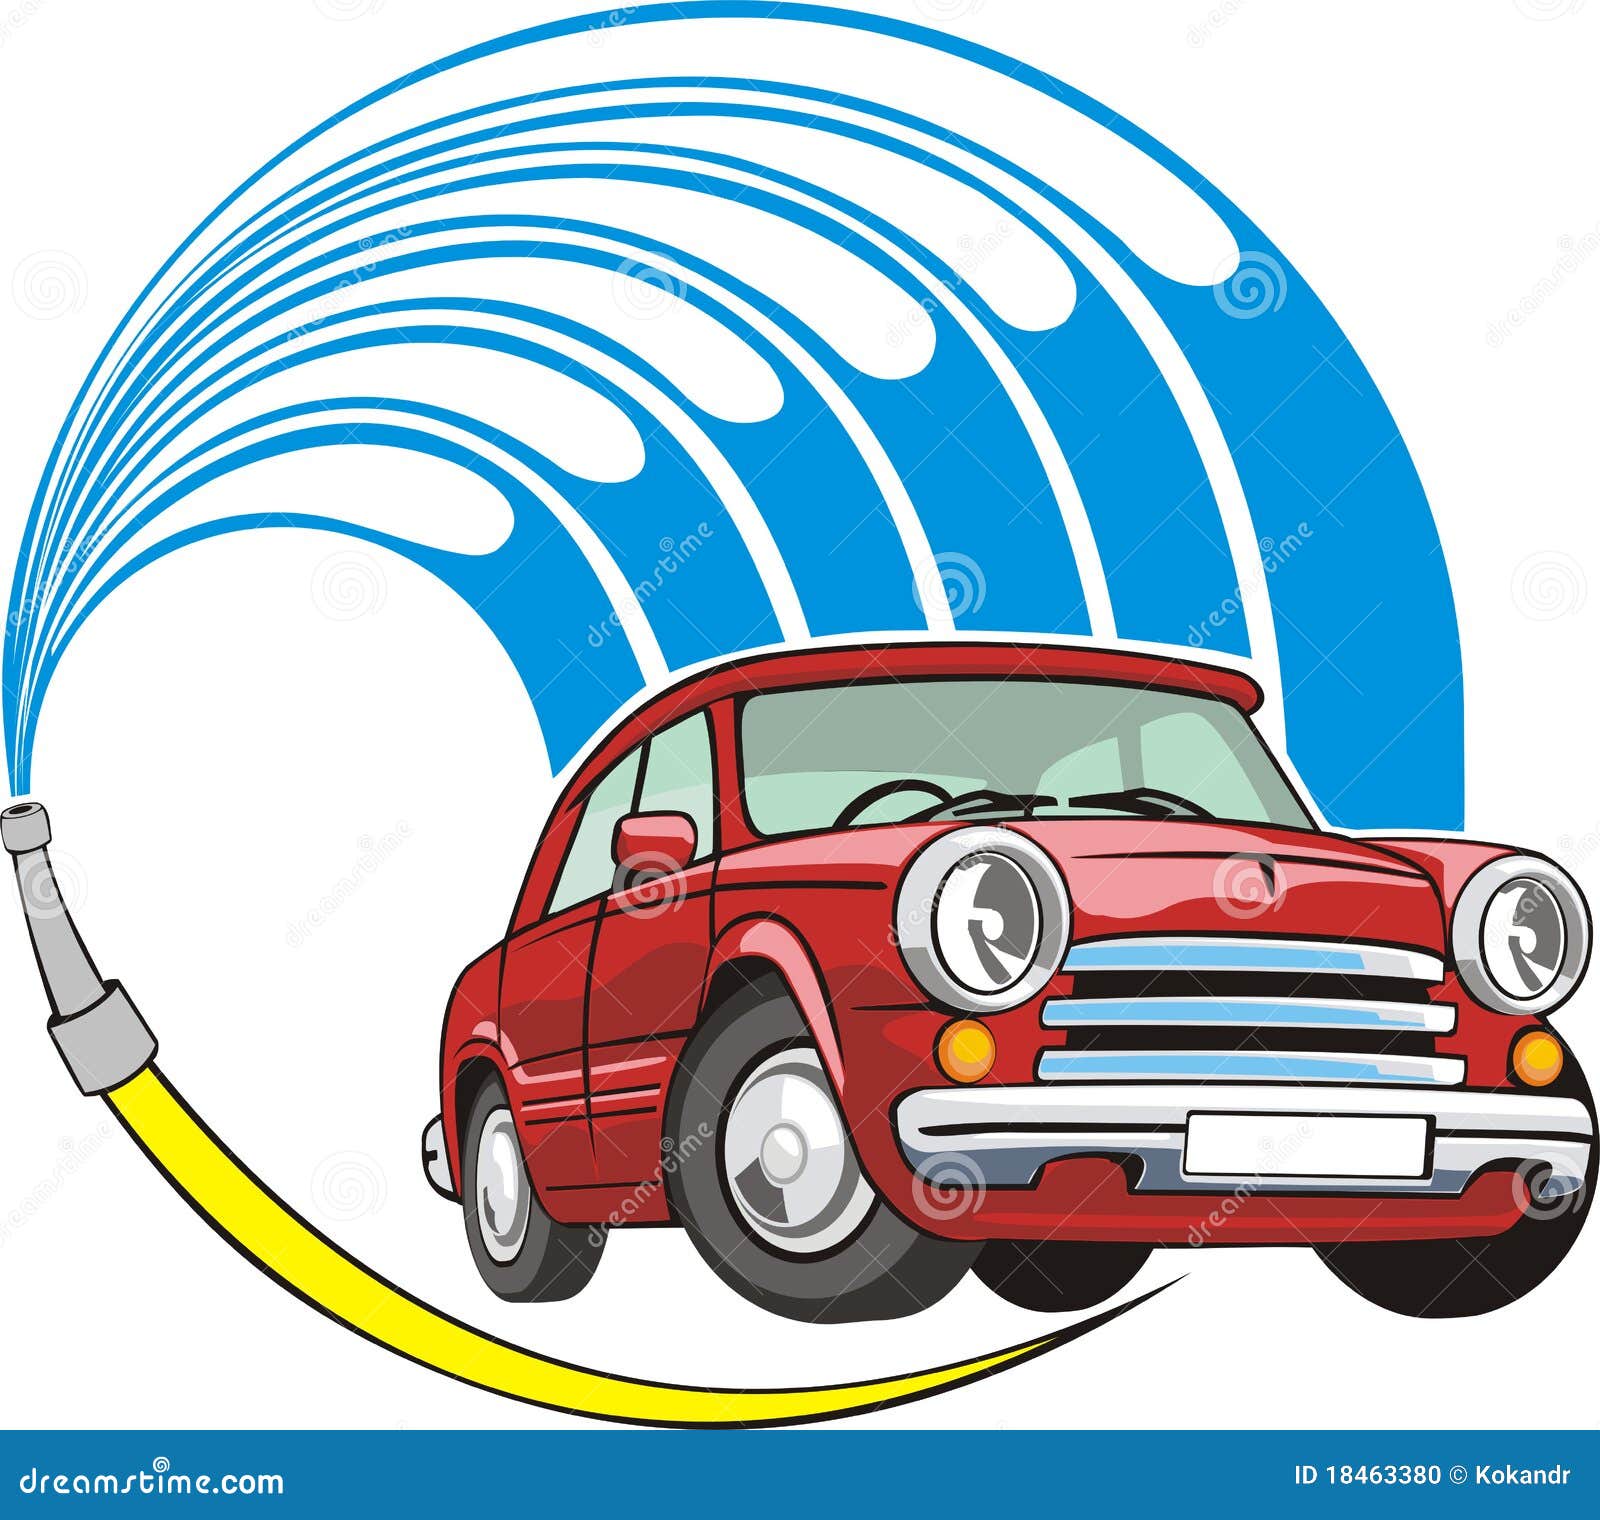 car wash clipart free download - photo #48